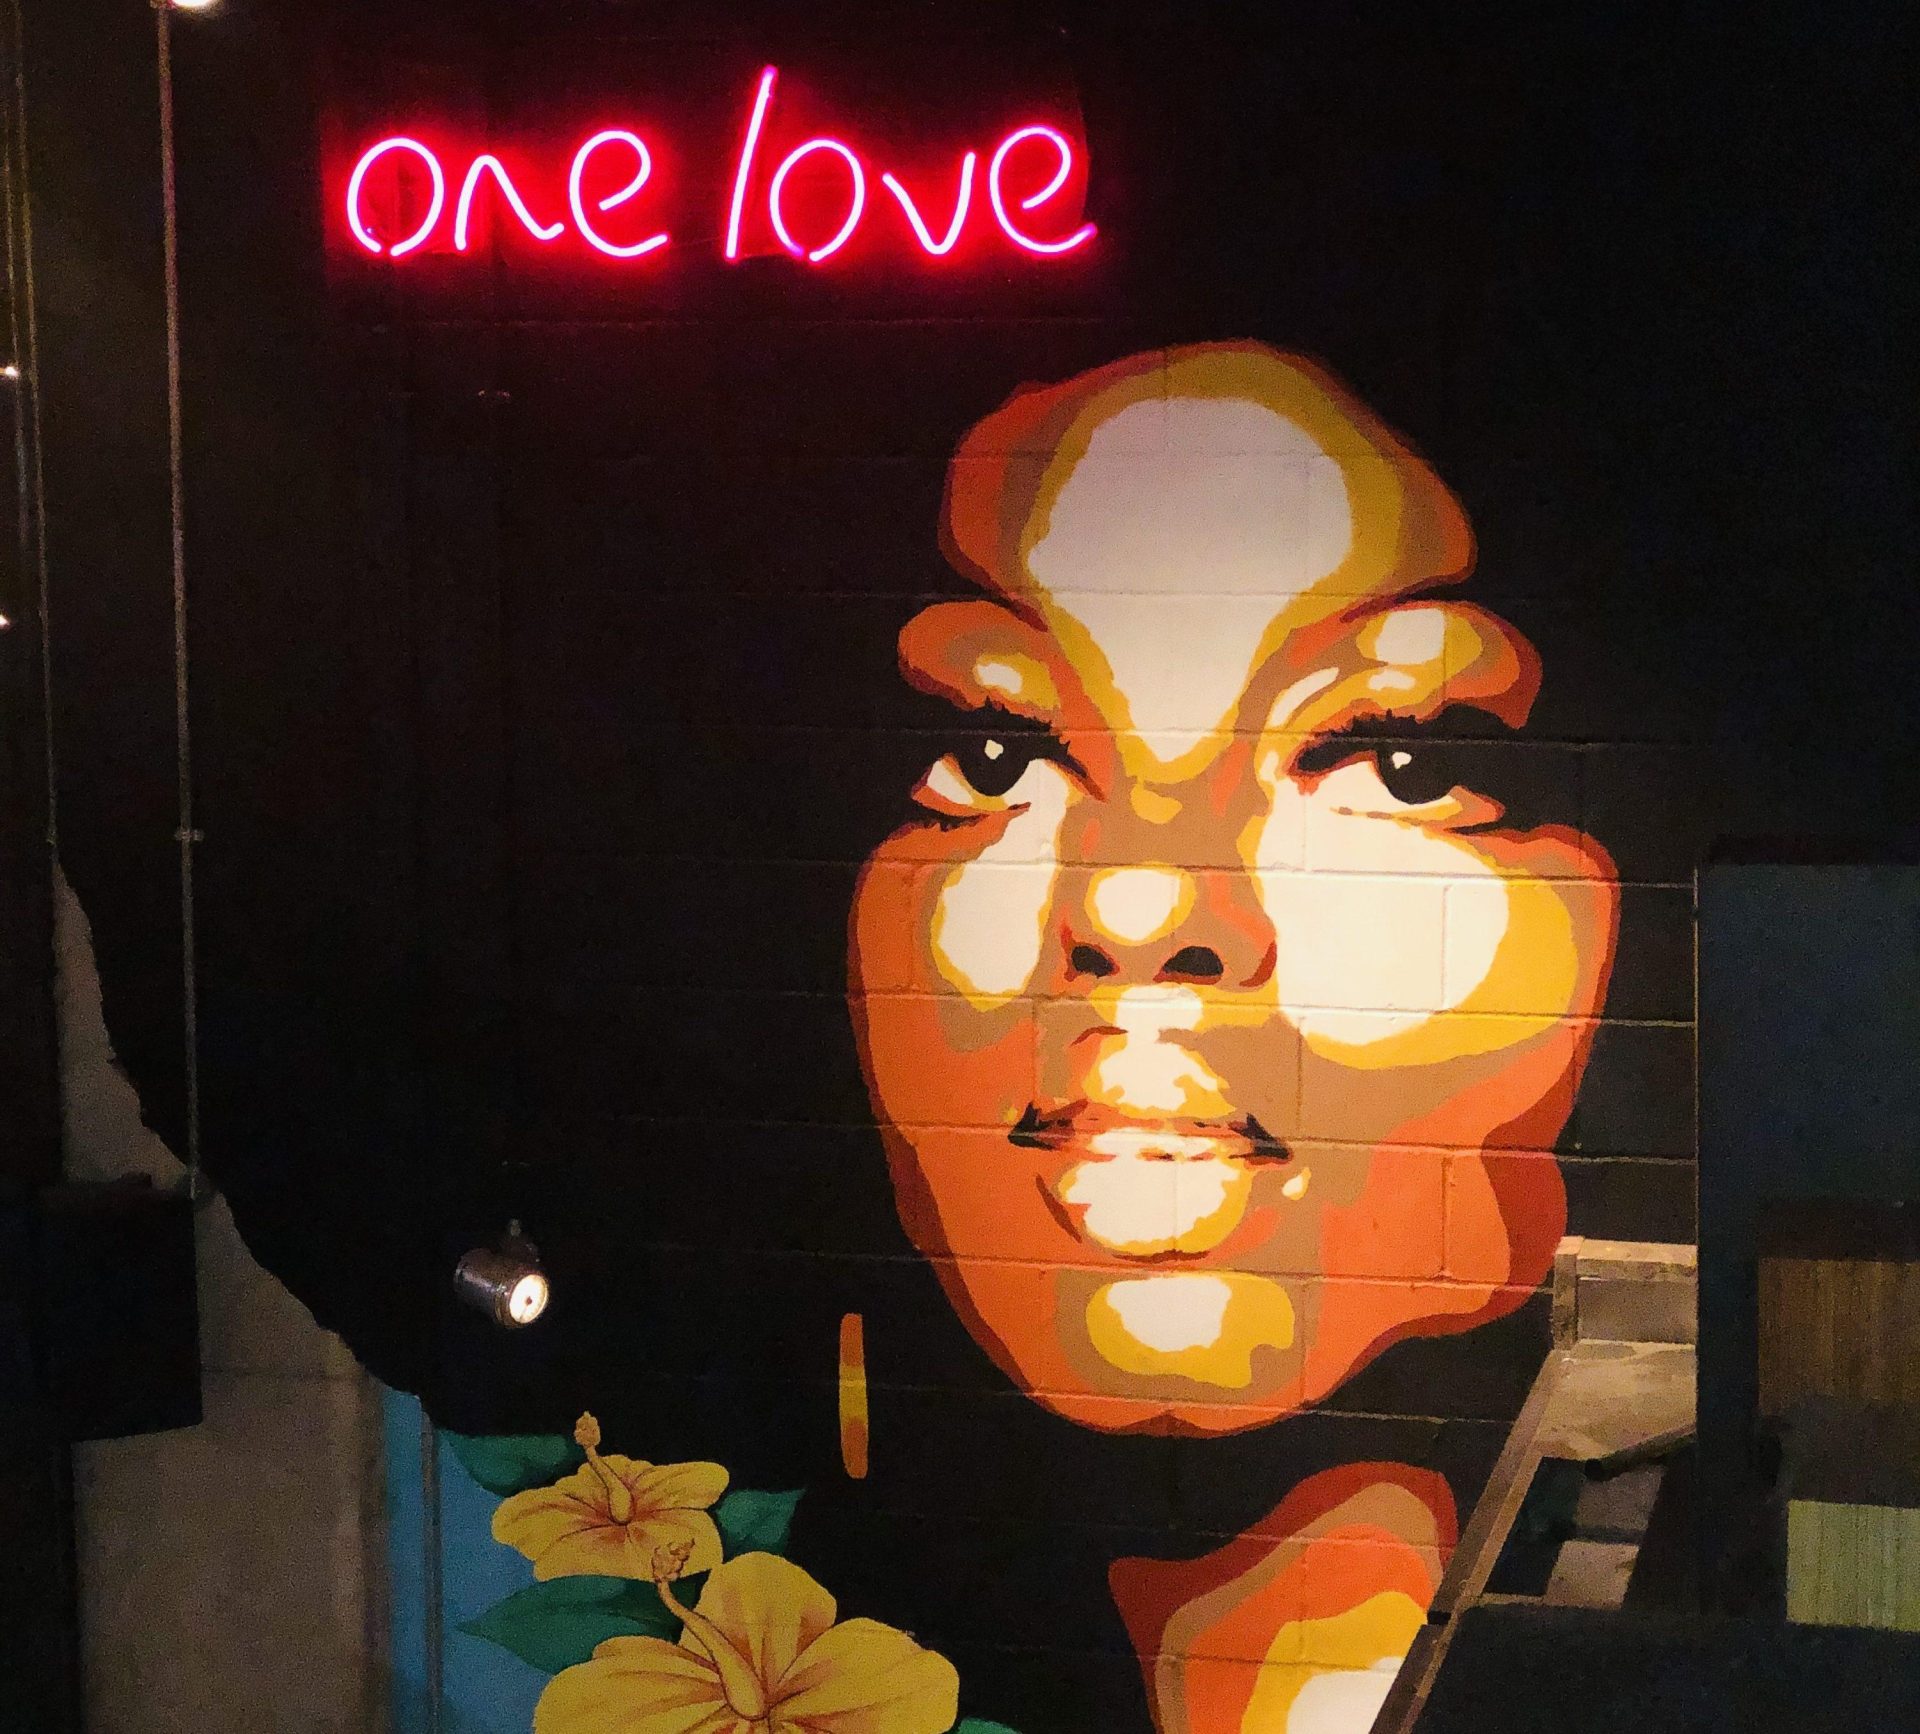 Walthamstow lady wall mural and one love neon sign